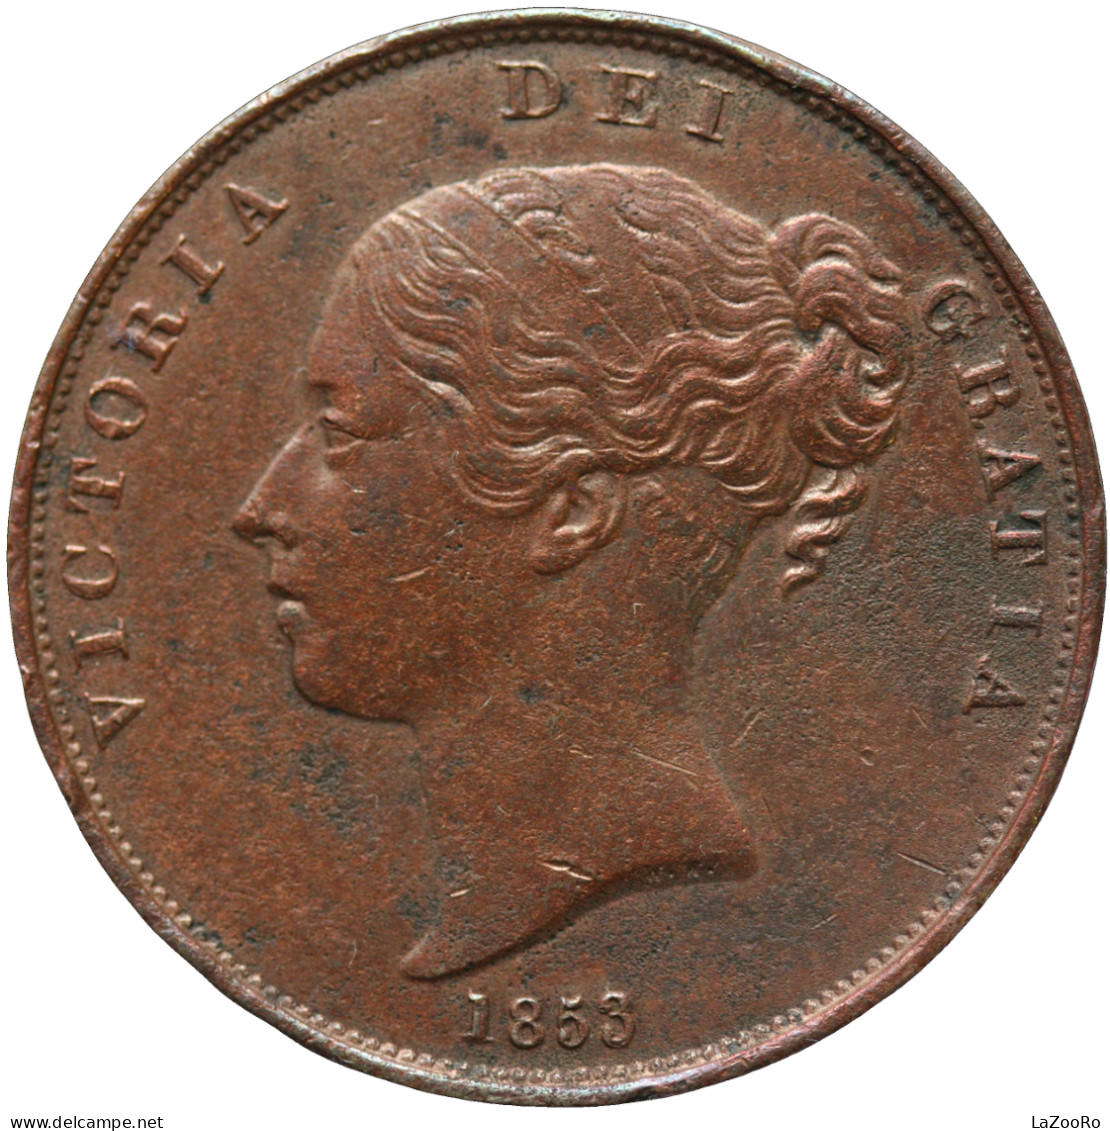 LaZooRo: Great Britain 1 Penny 1853 PROOF RARE Doubling - D. 1 Penny